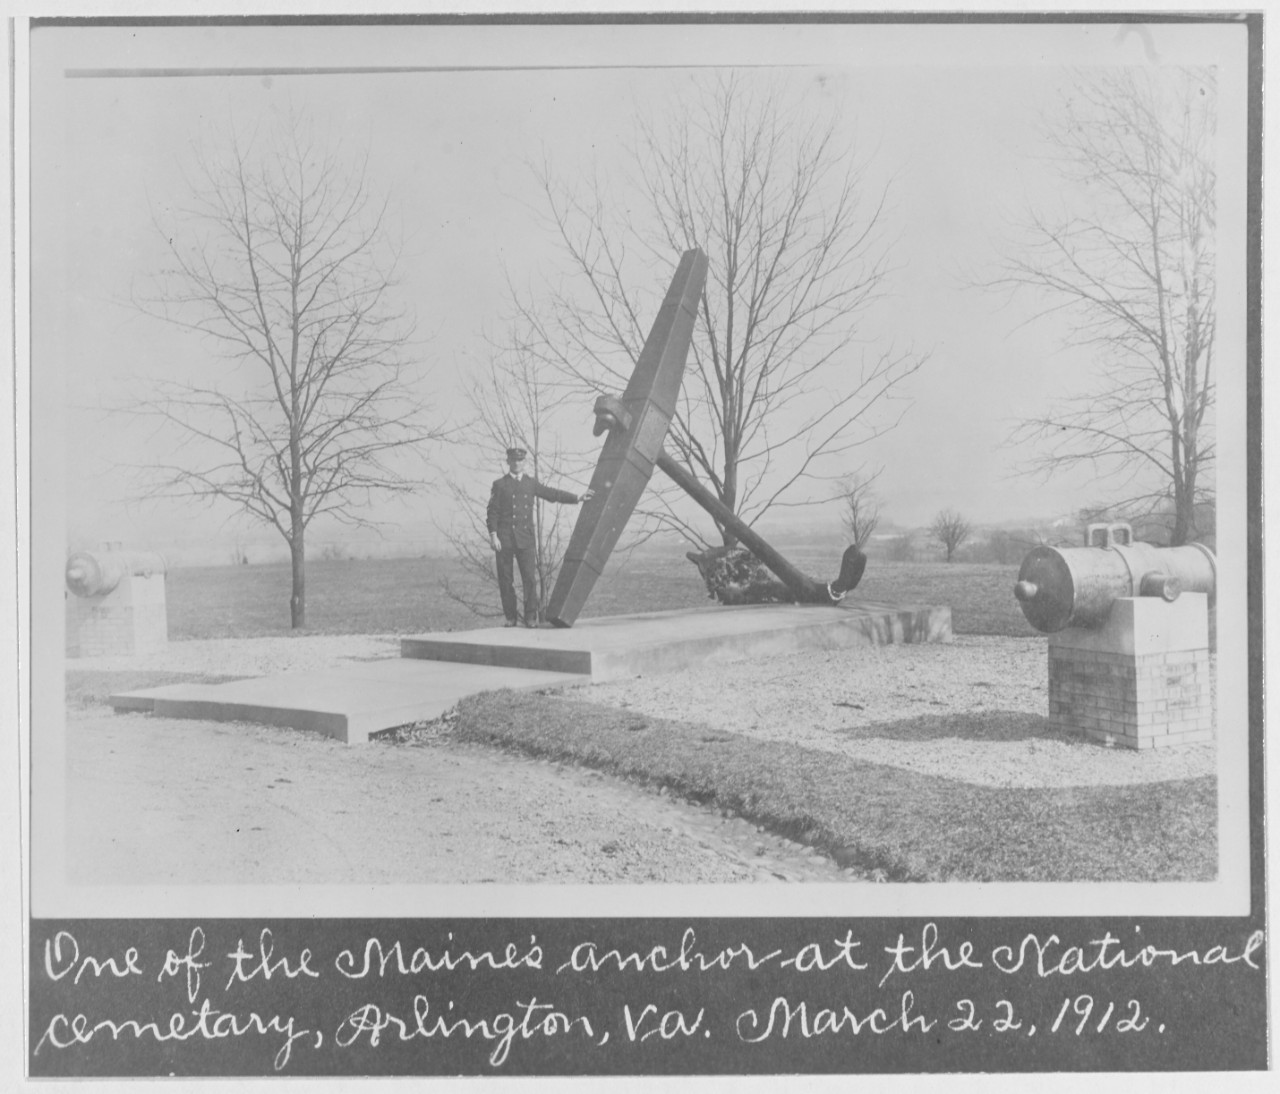 Monument in Memory of USS MAINE Disaster, Arlington National Cemetery, March 22, 1912. 